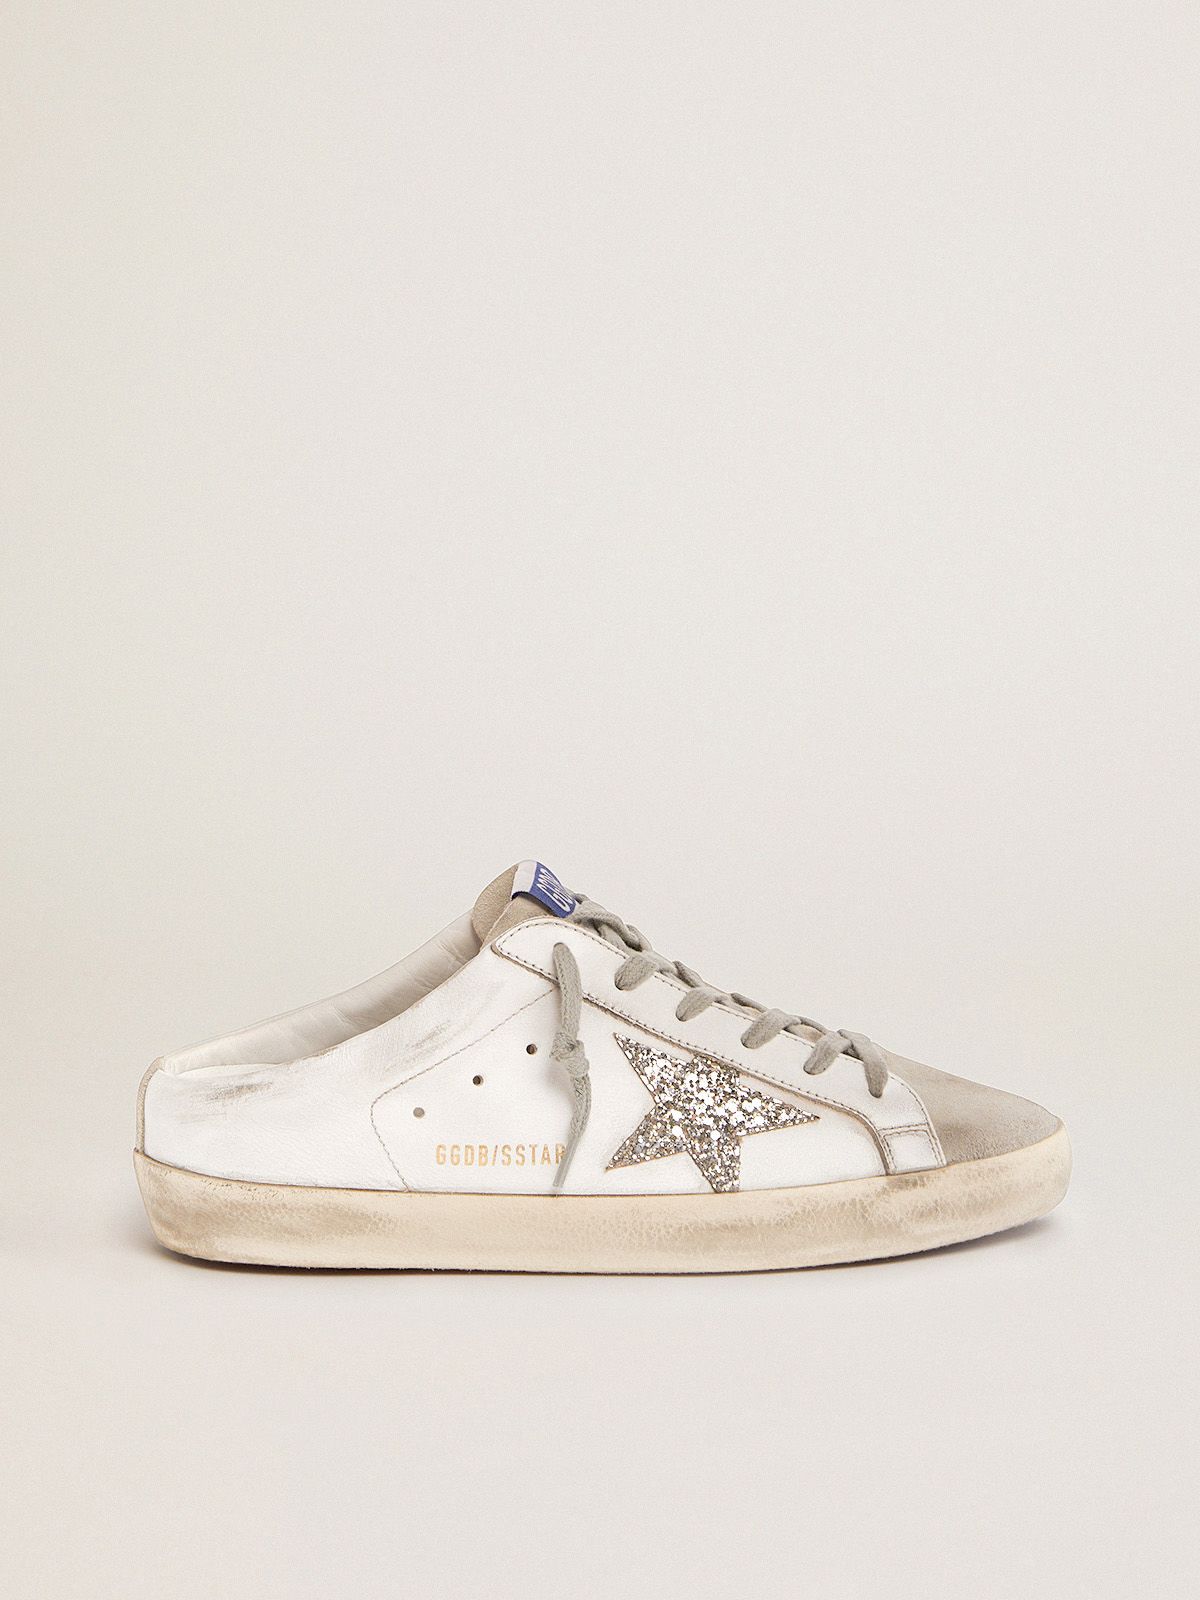 golden goose gray with white suede leather and silver star Super-Star glitter Sabots in